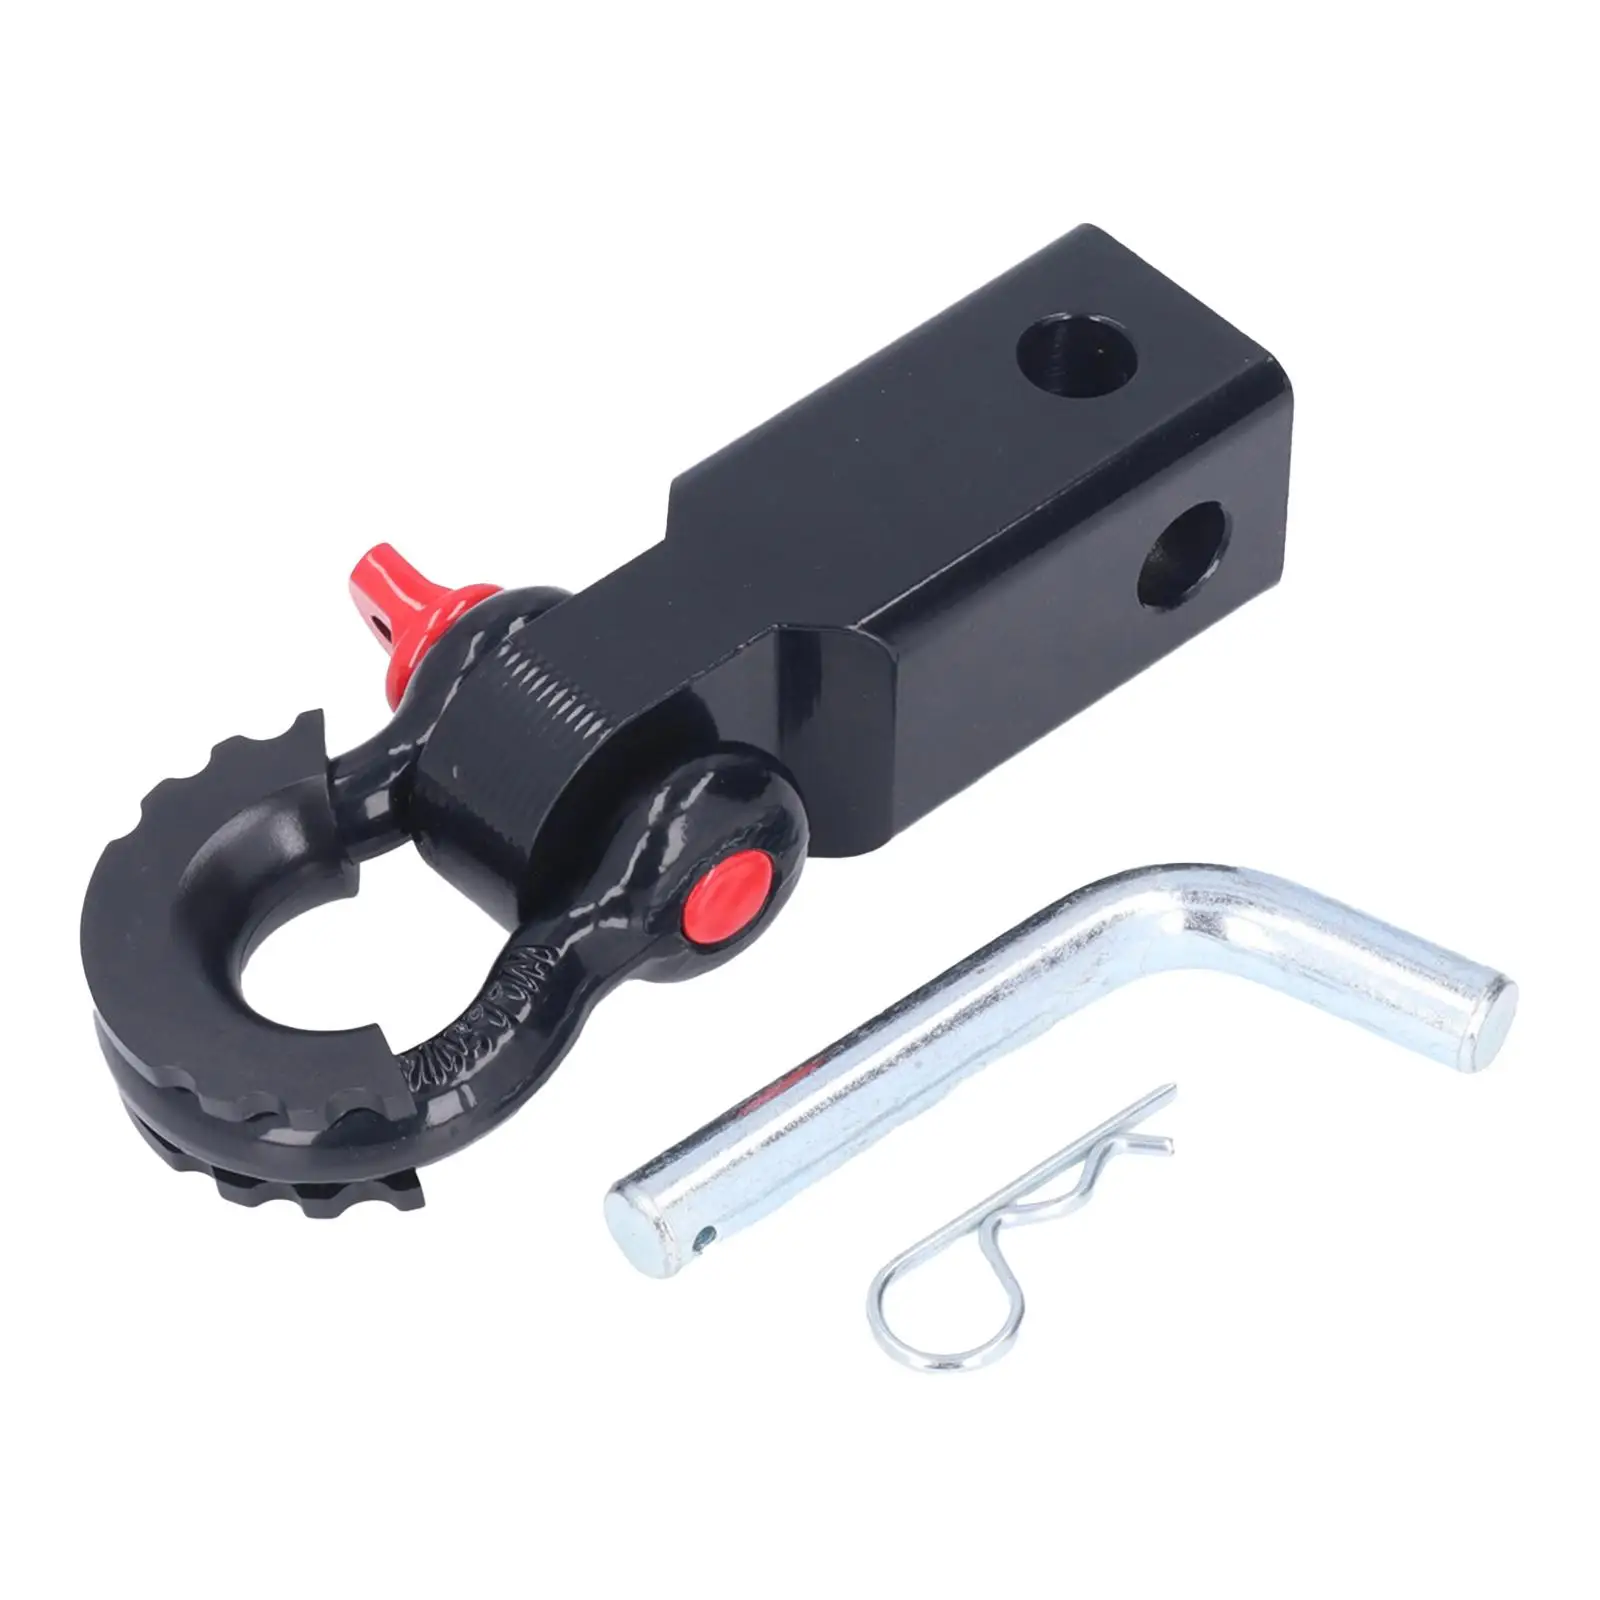 Shackle Hitch Receiver Spare Easy Using Heavy Duty Block Professional Attachments with Connector for SUV Vehicle